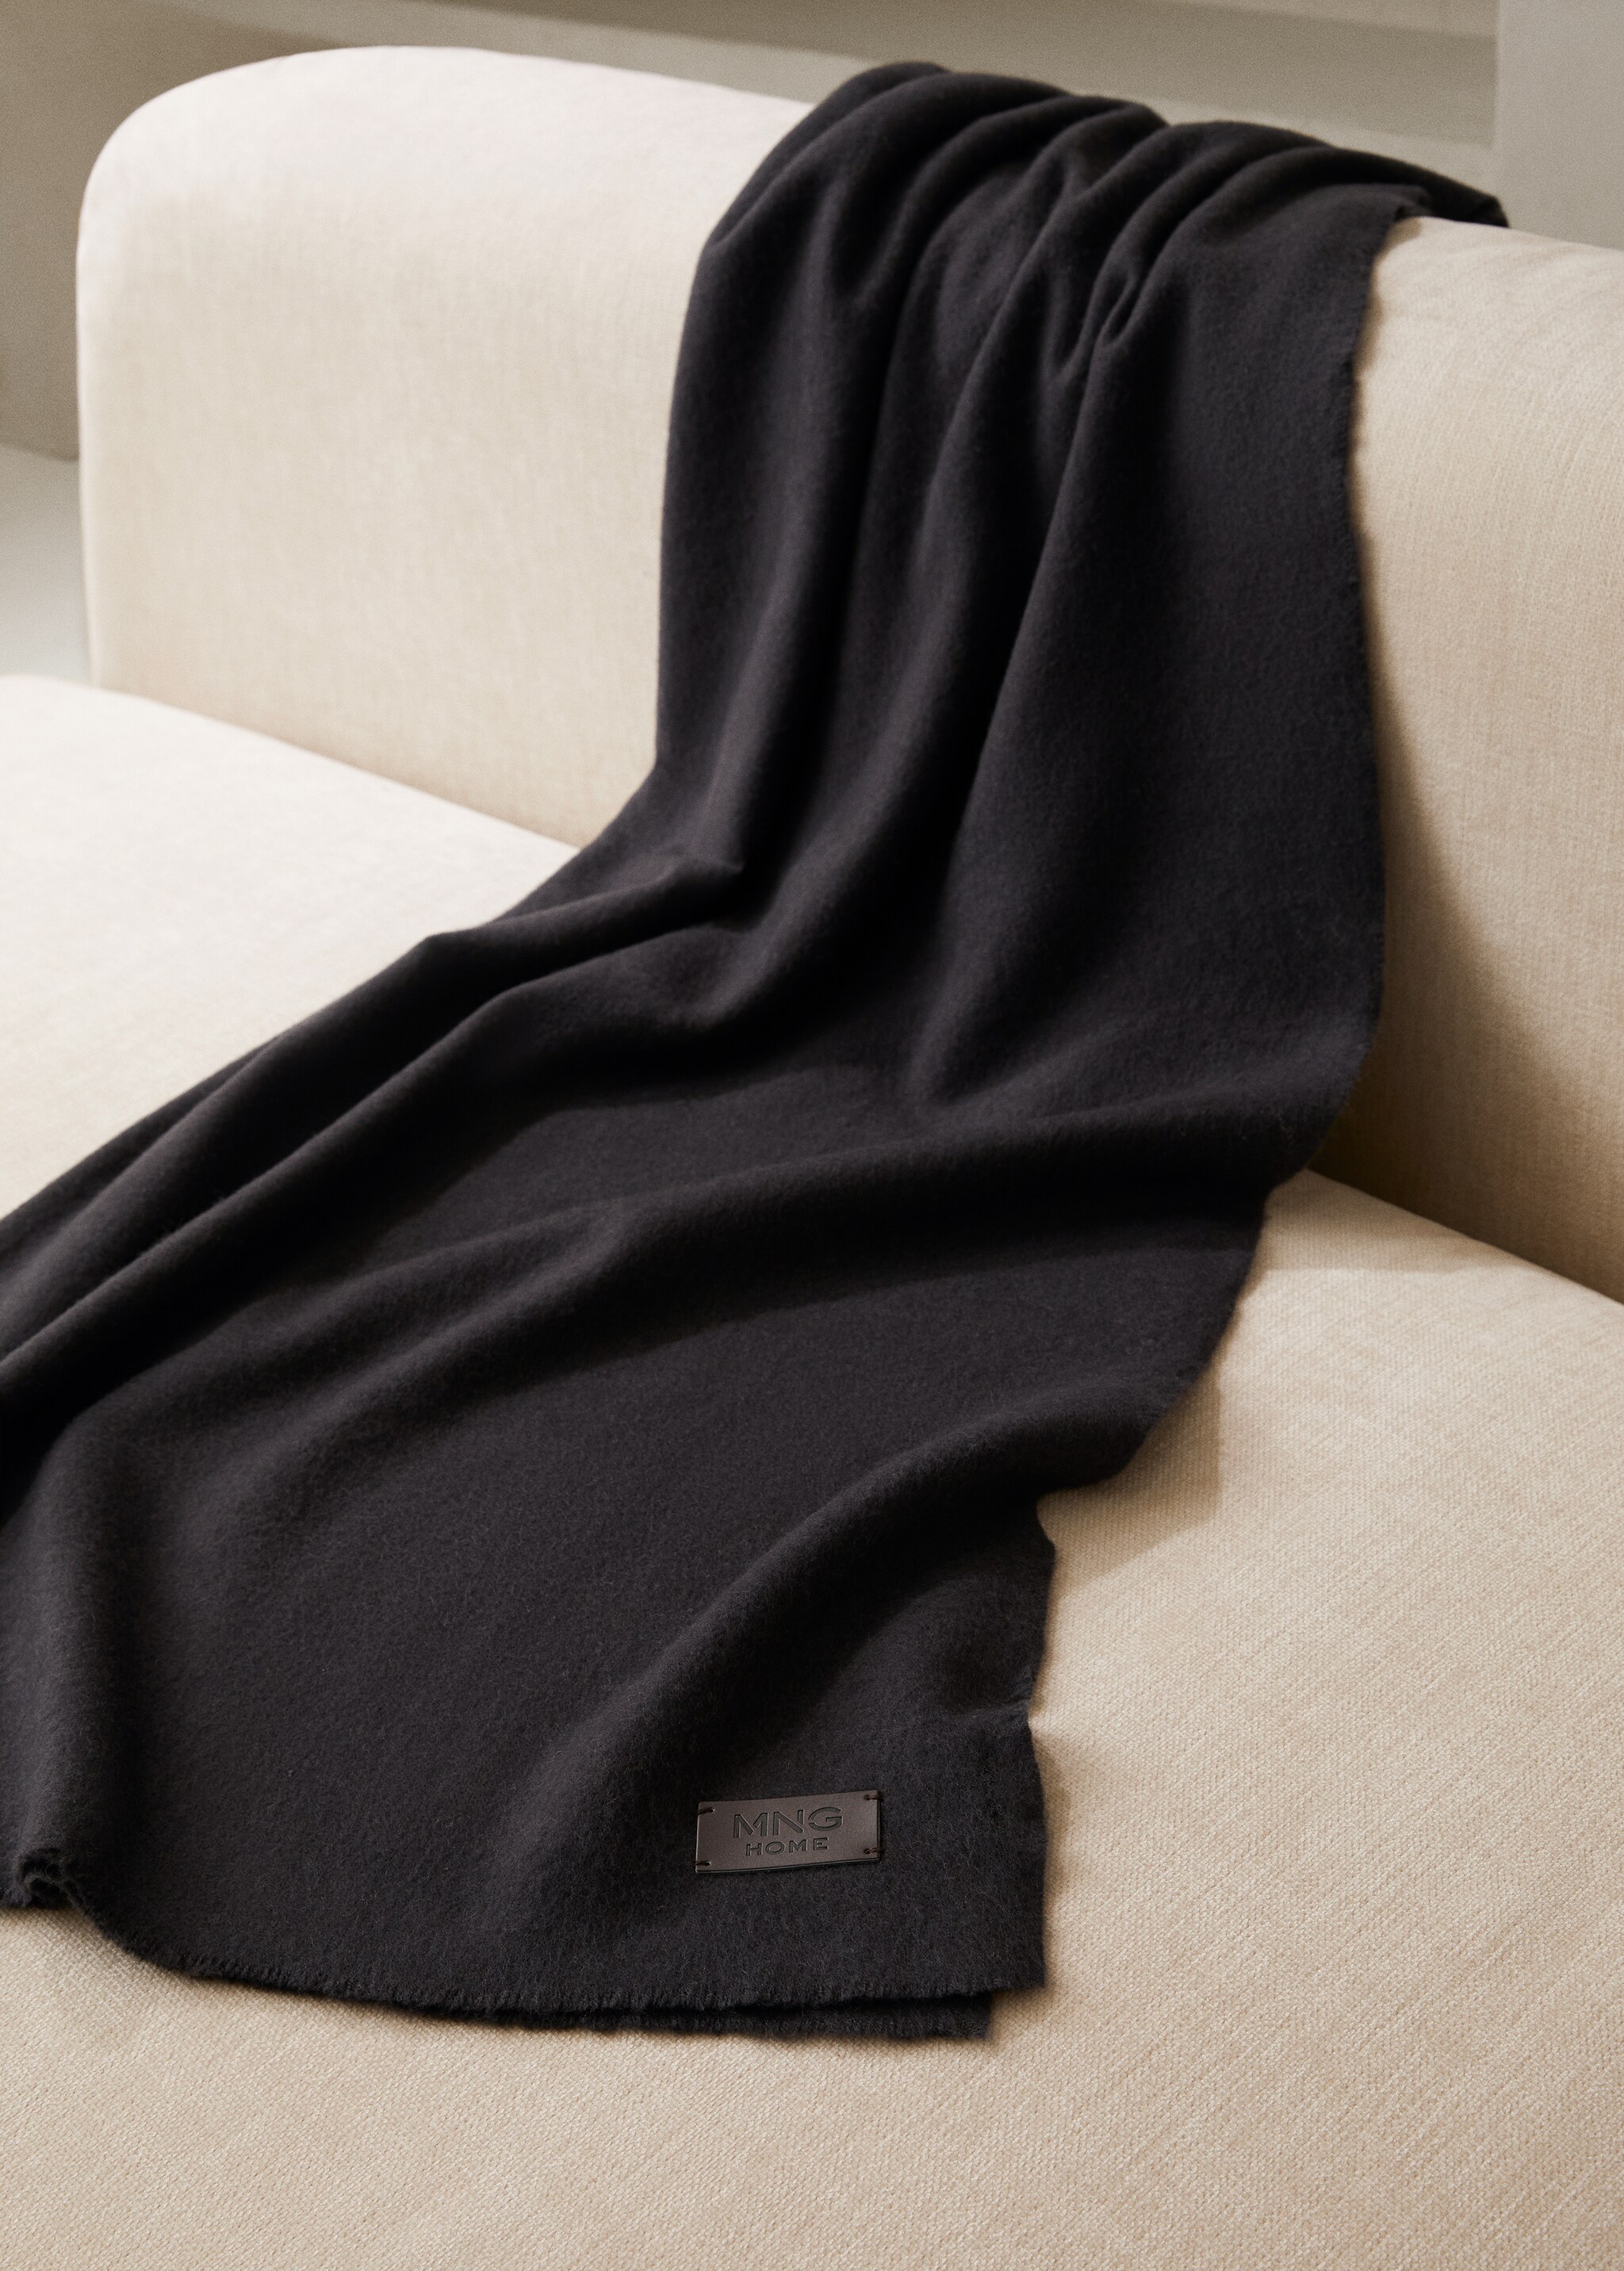 Soft wool and cashmere blanket - General plane